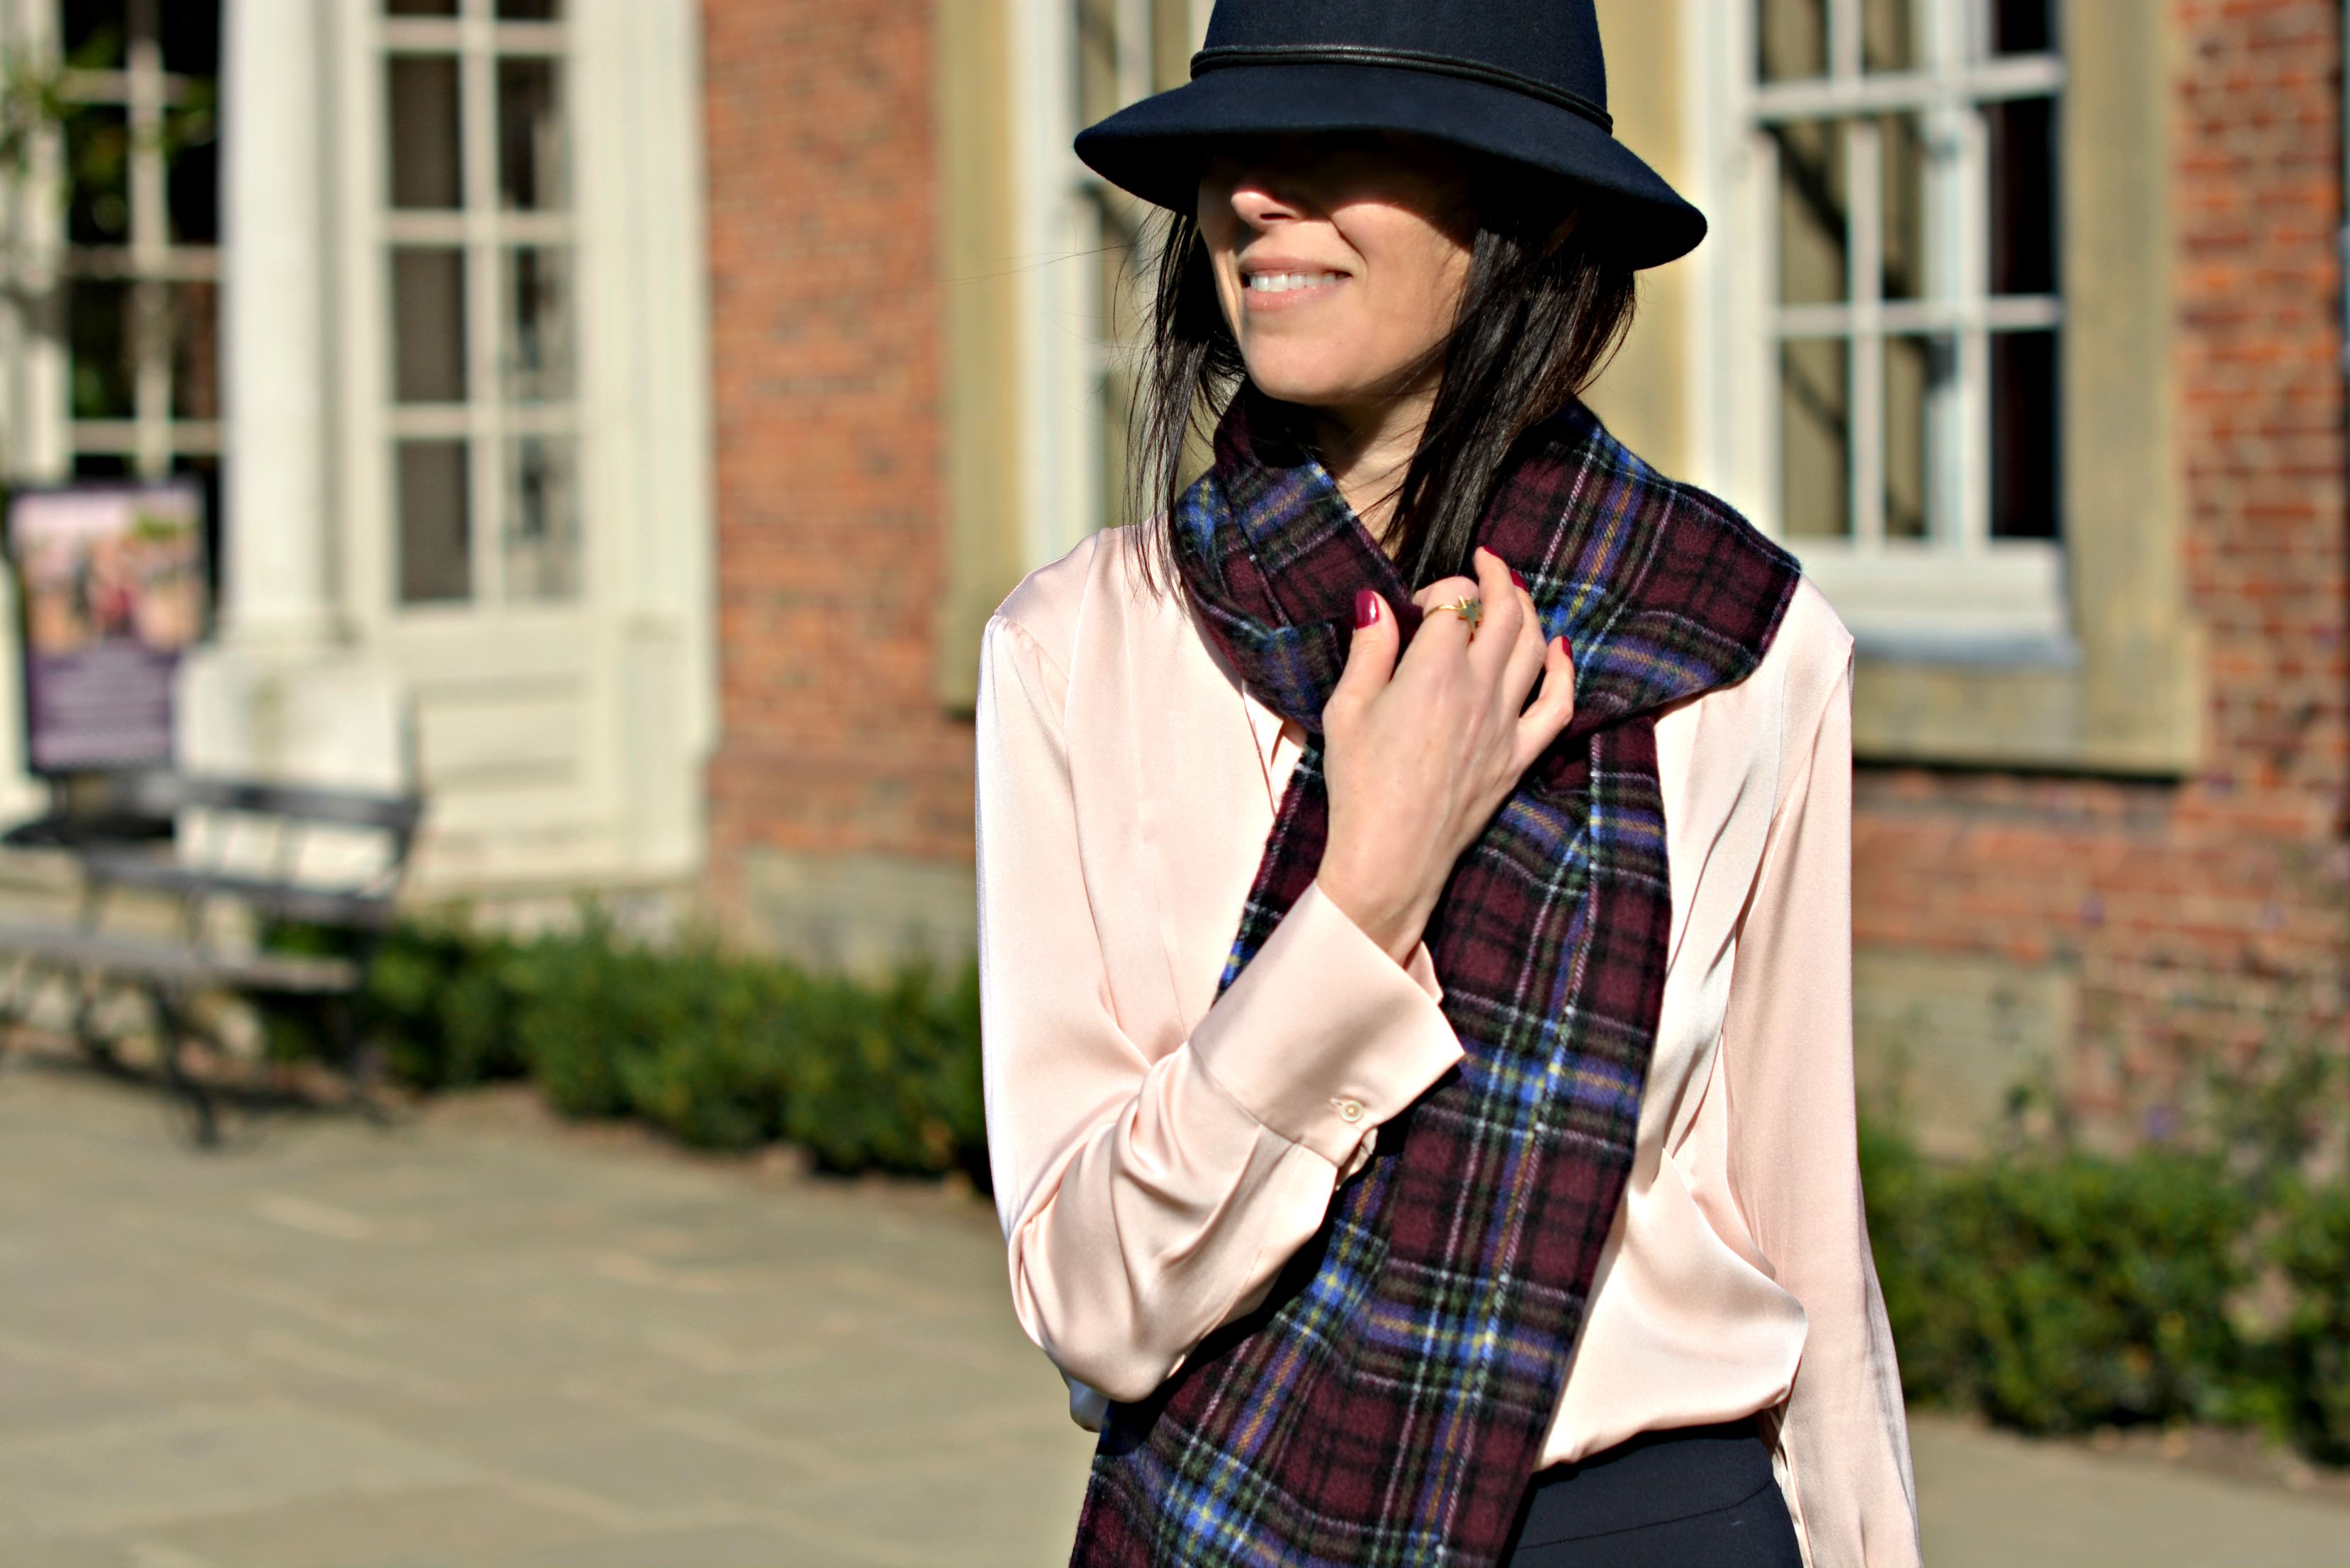 Investment pieces x Winser London - accessorized with Joules check scarf, Laura Ashley trilby